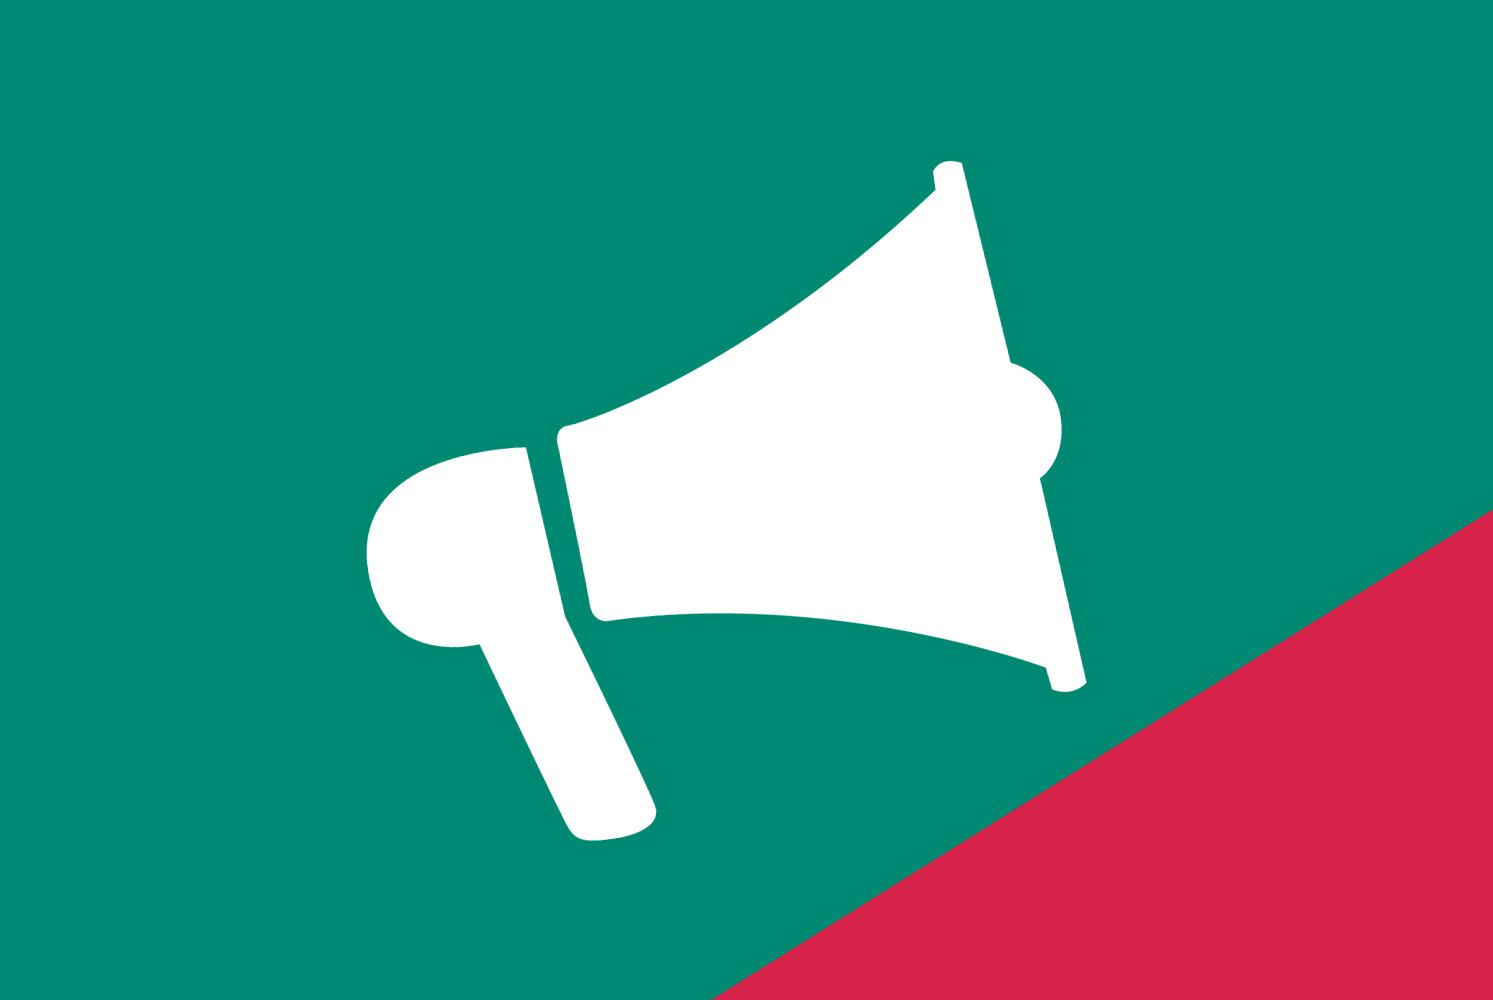 Megaphone outline on a green and red background